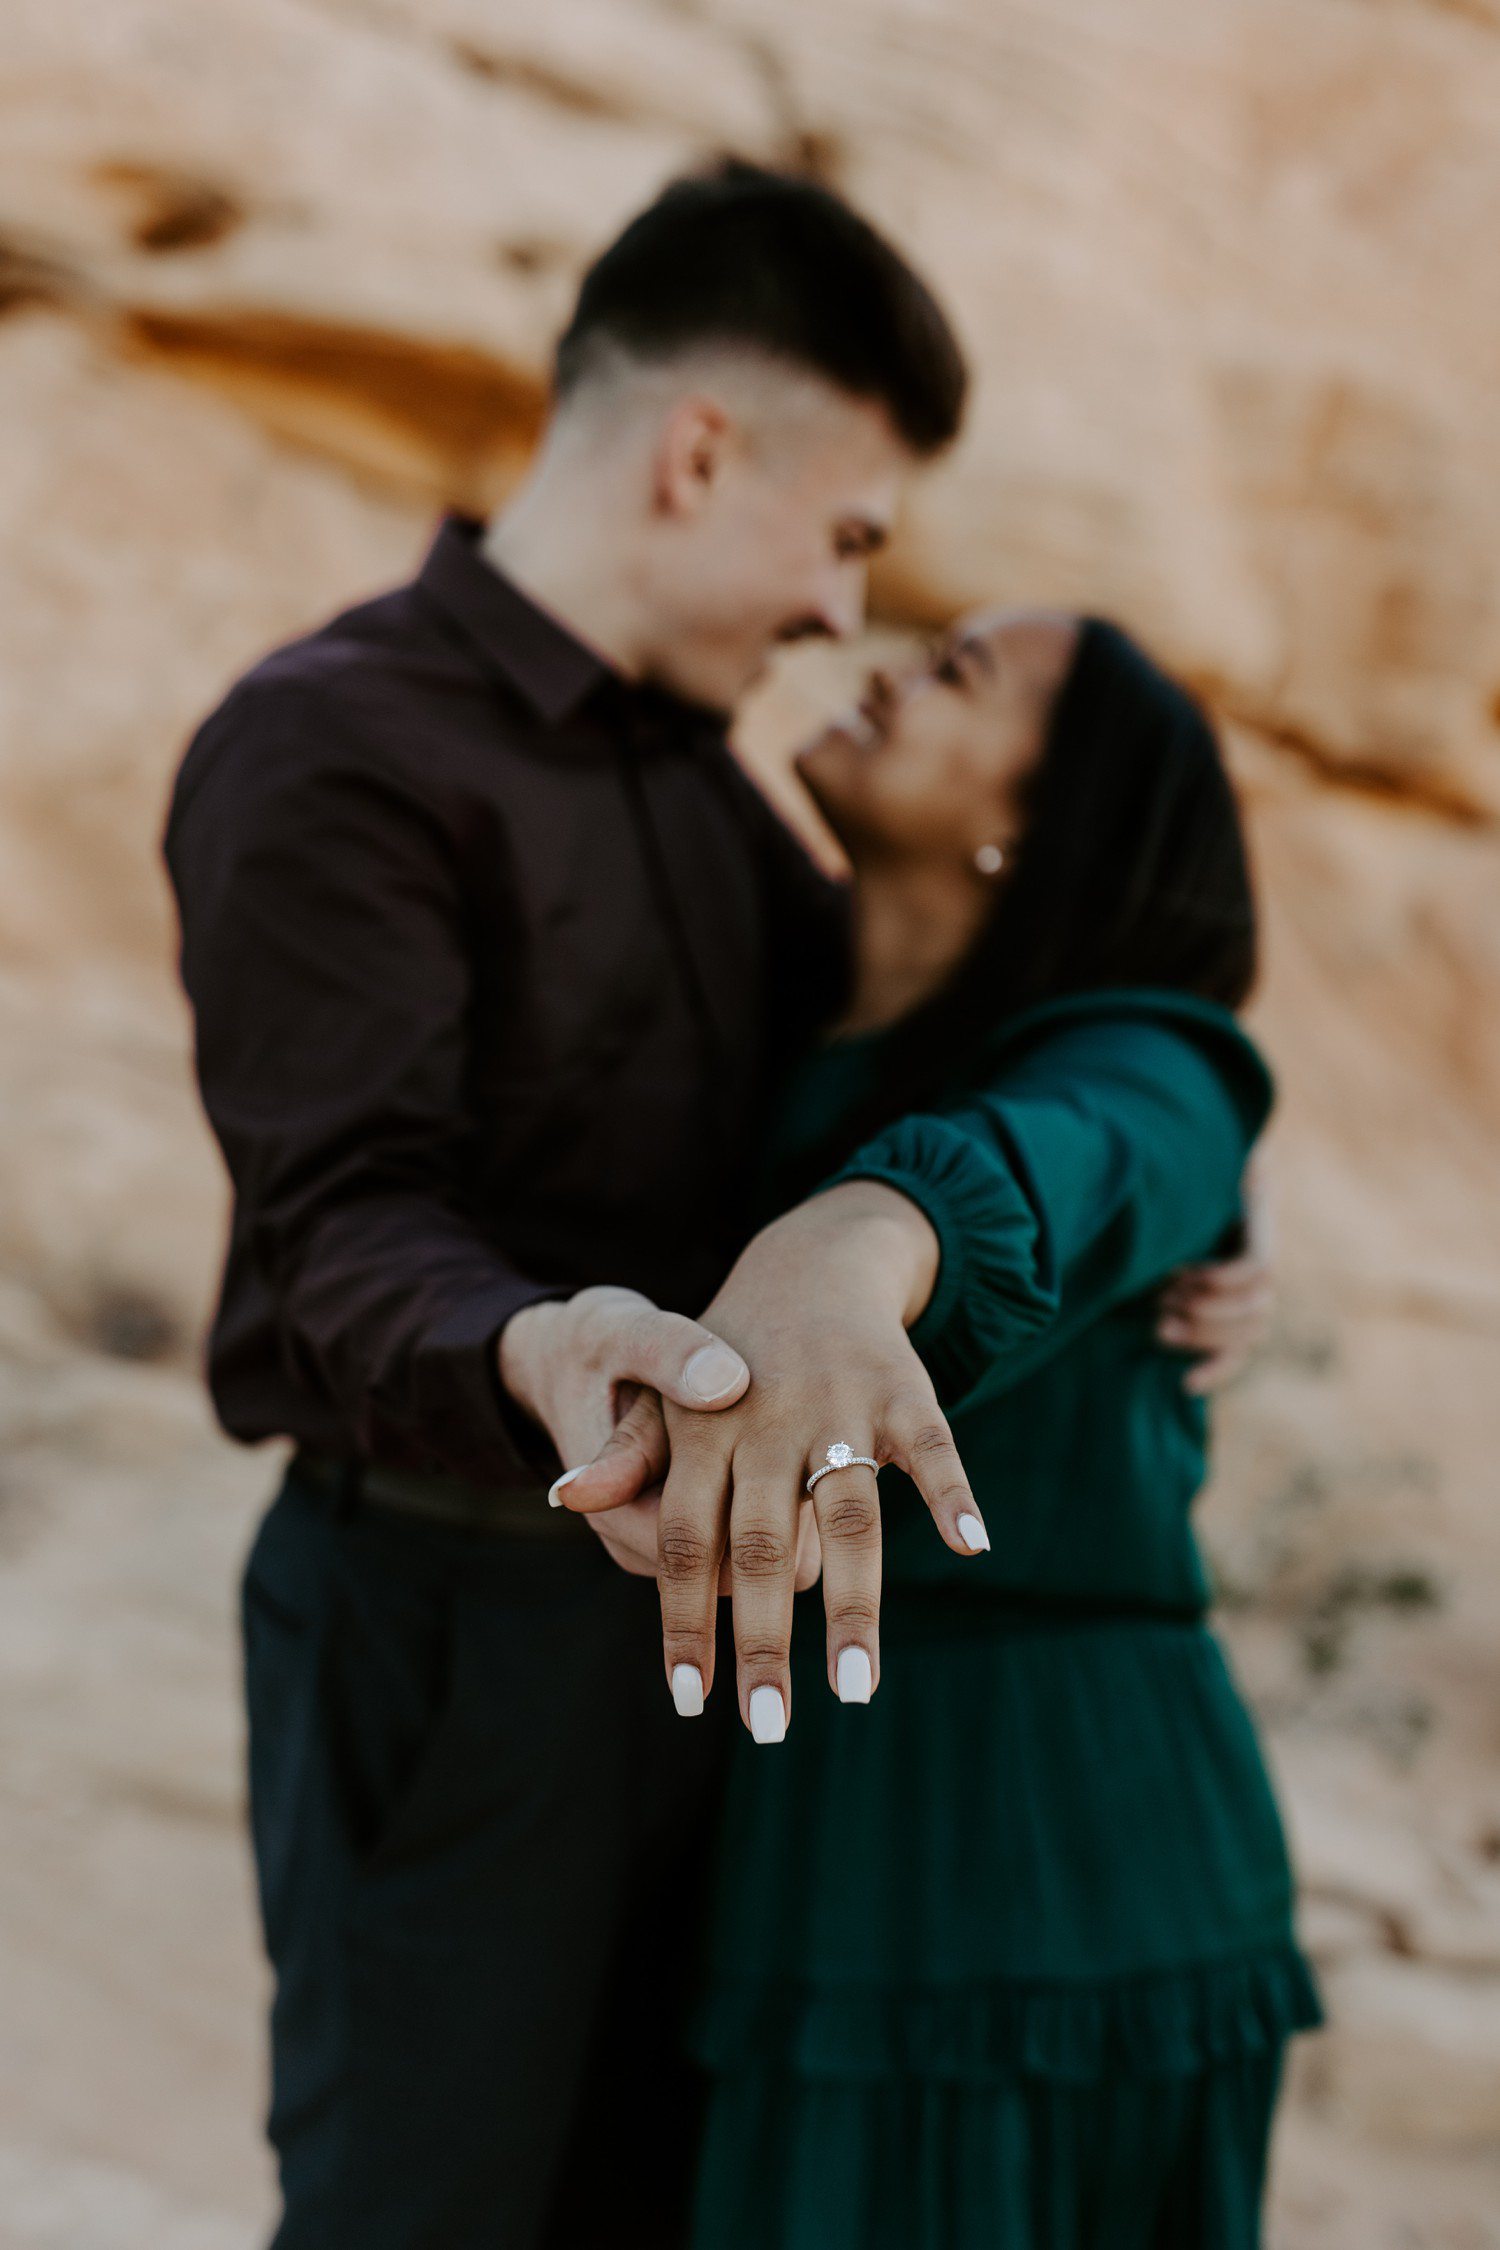 Showing off engagement ring after surprise proposal in Las Vegas.